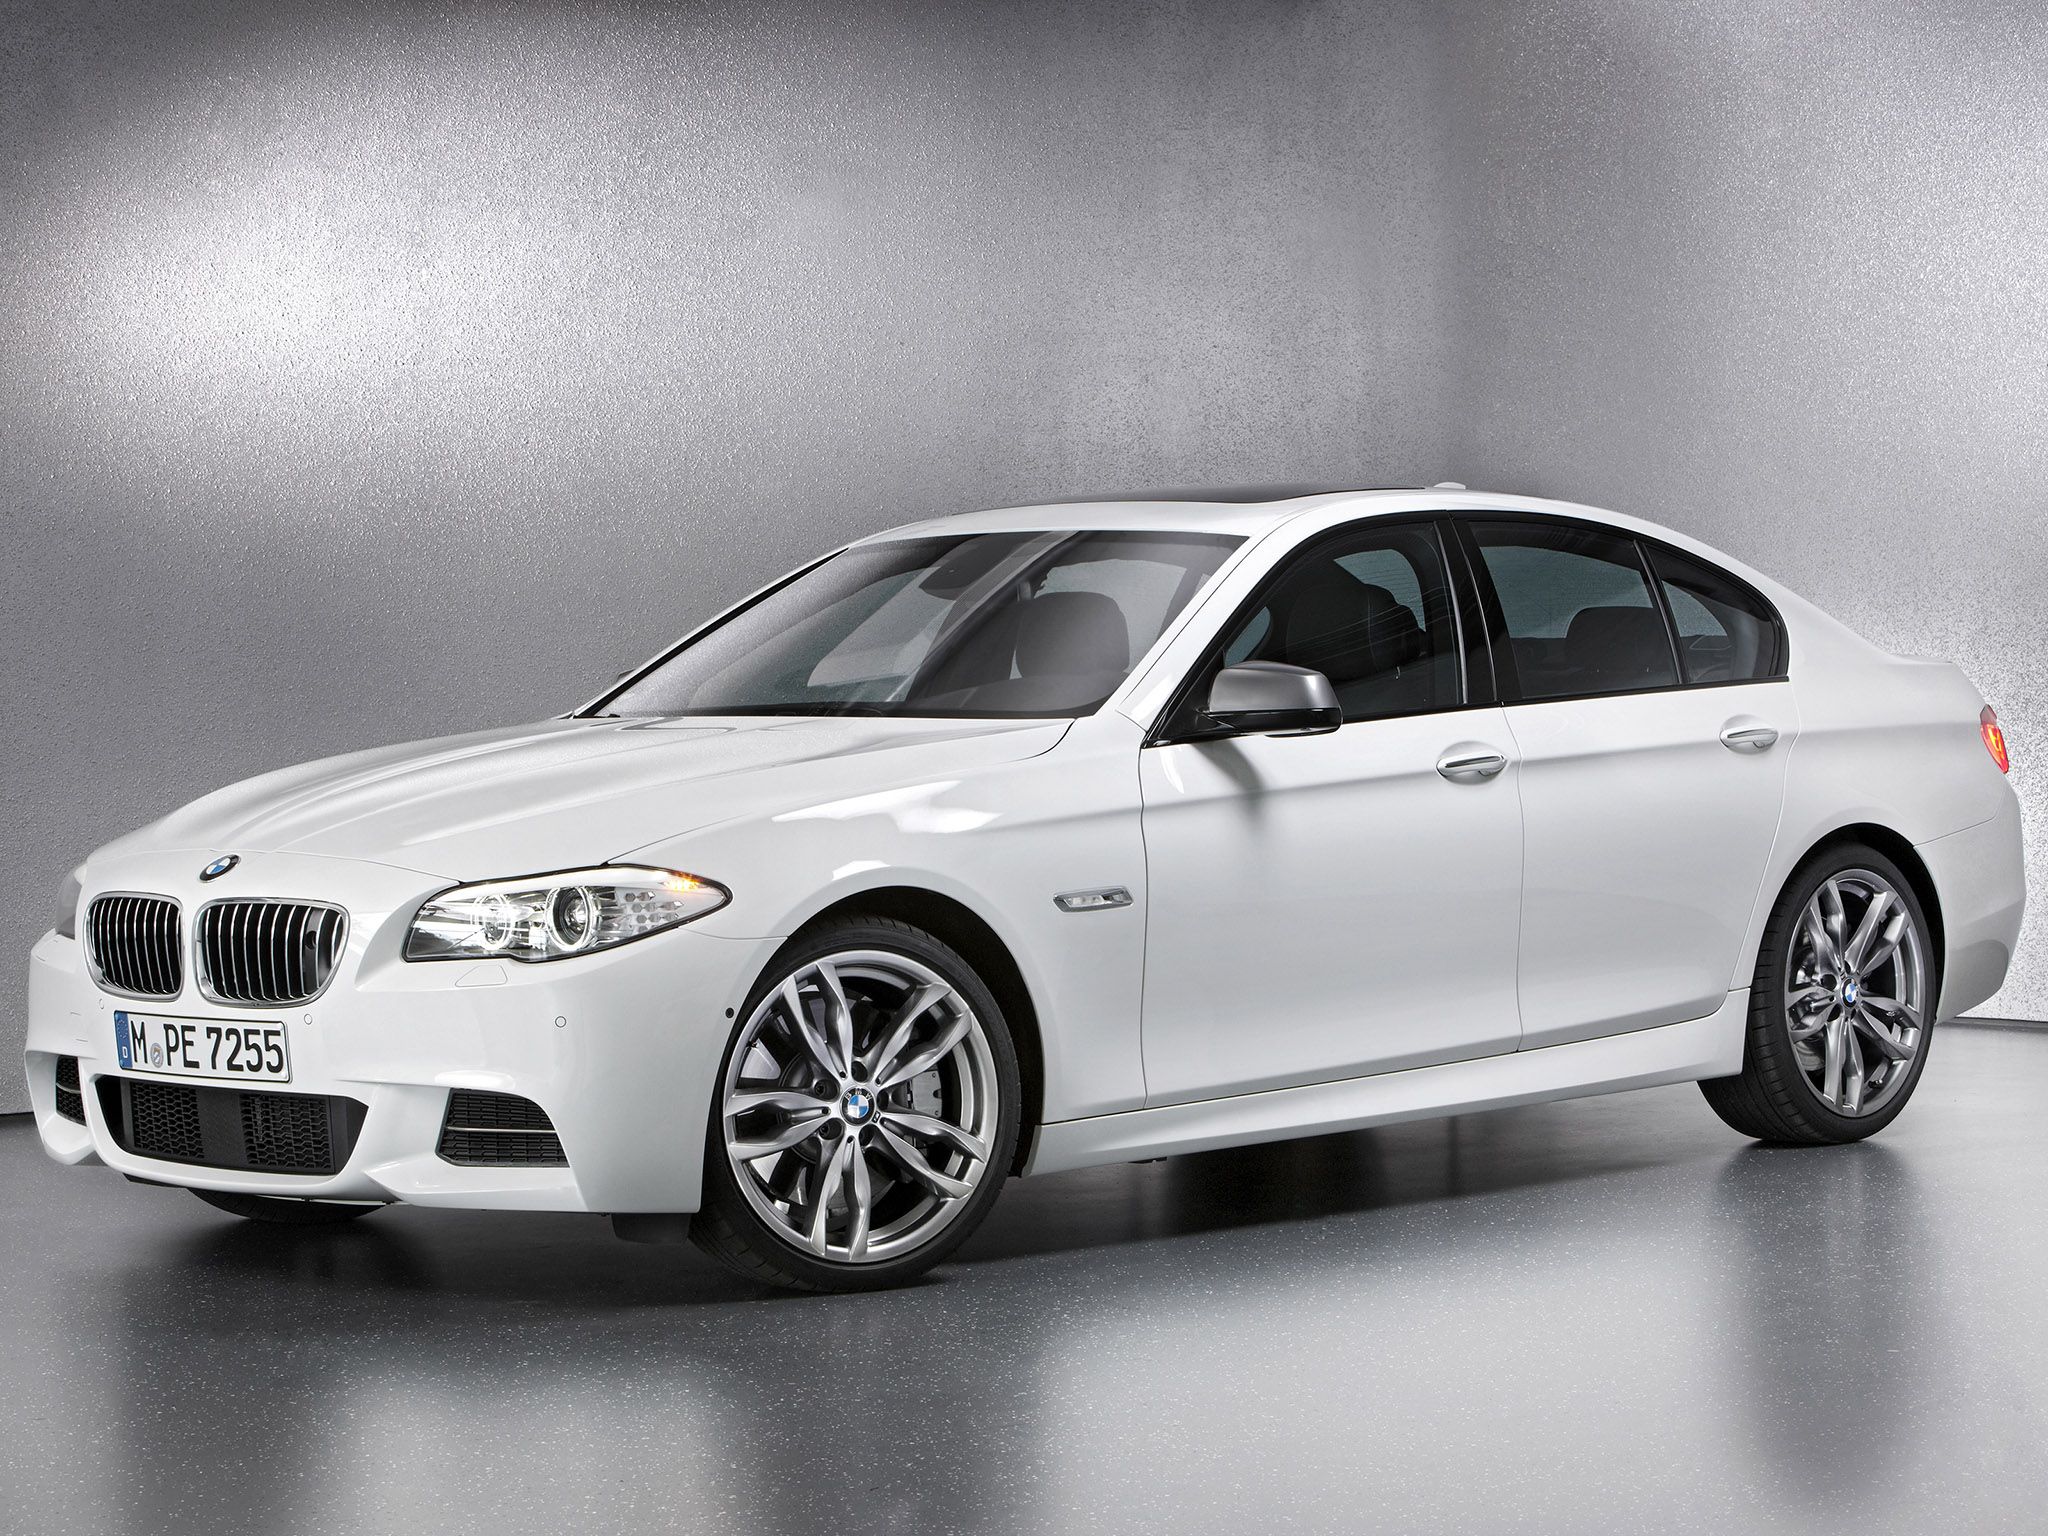 13 Bmw 5 Series Sedan 535i Xdrive 0 60 Times Top Speed Specs Quarter Mile And Wallpapers Mycarspecs United States Usa